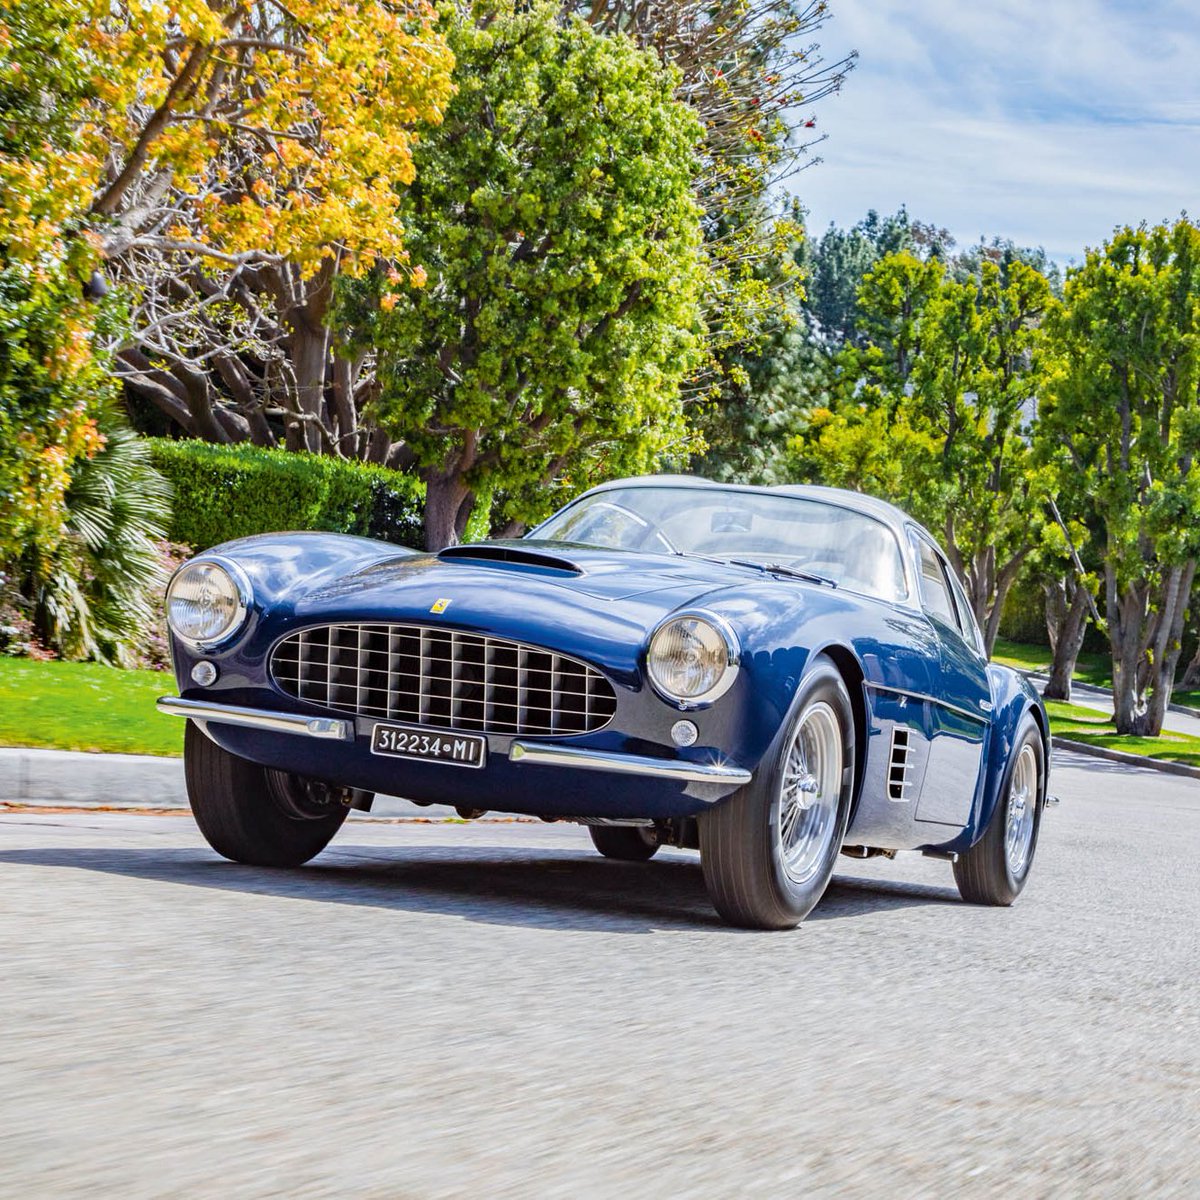 One of the rarest and most beautiful Ferraris, this Zagato-bodied 250GT garners awards wherever it is shown. But its owner is not afraid to use it, as Mark Dixon finds out in the April issue – on sale now. 📷 Evan Klein